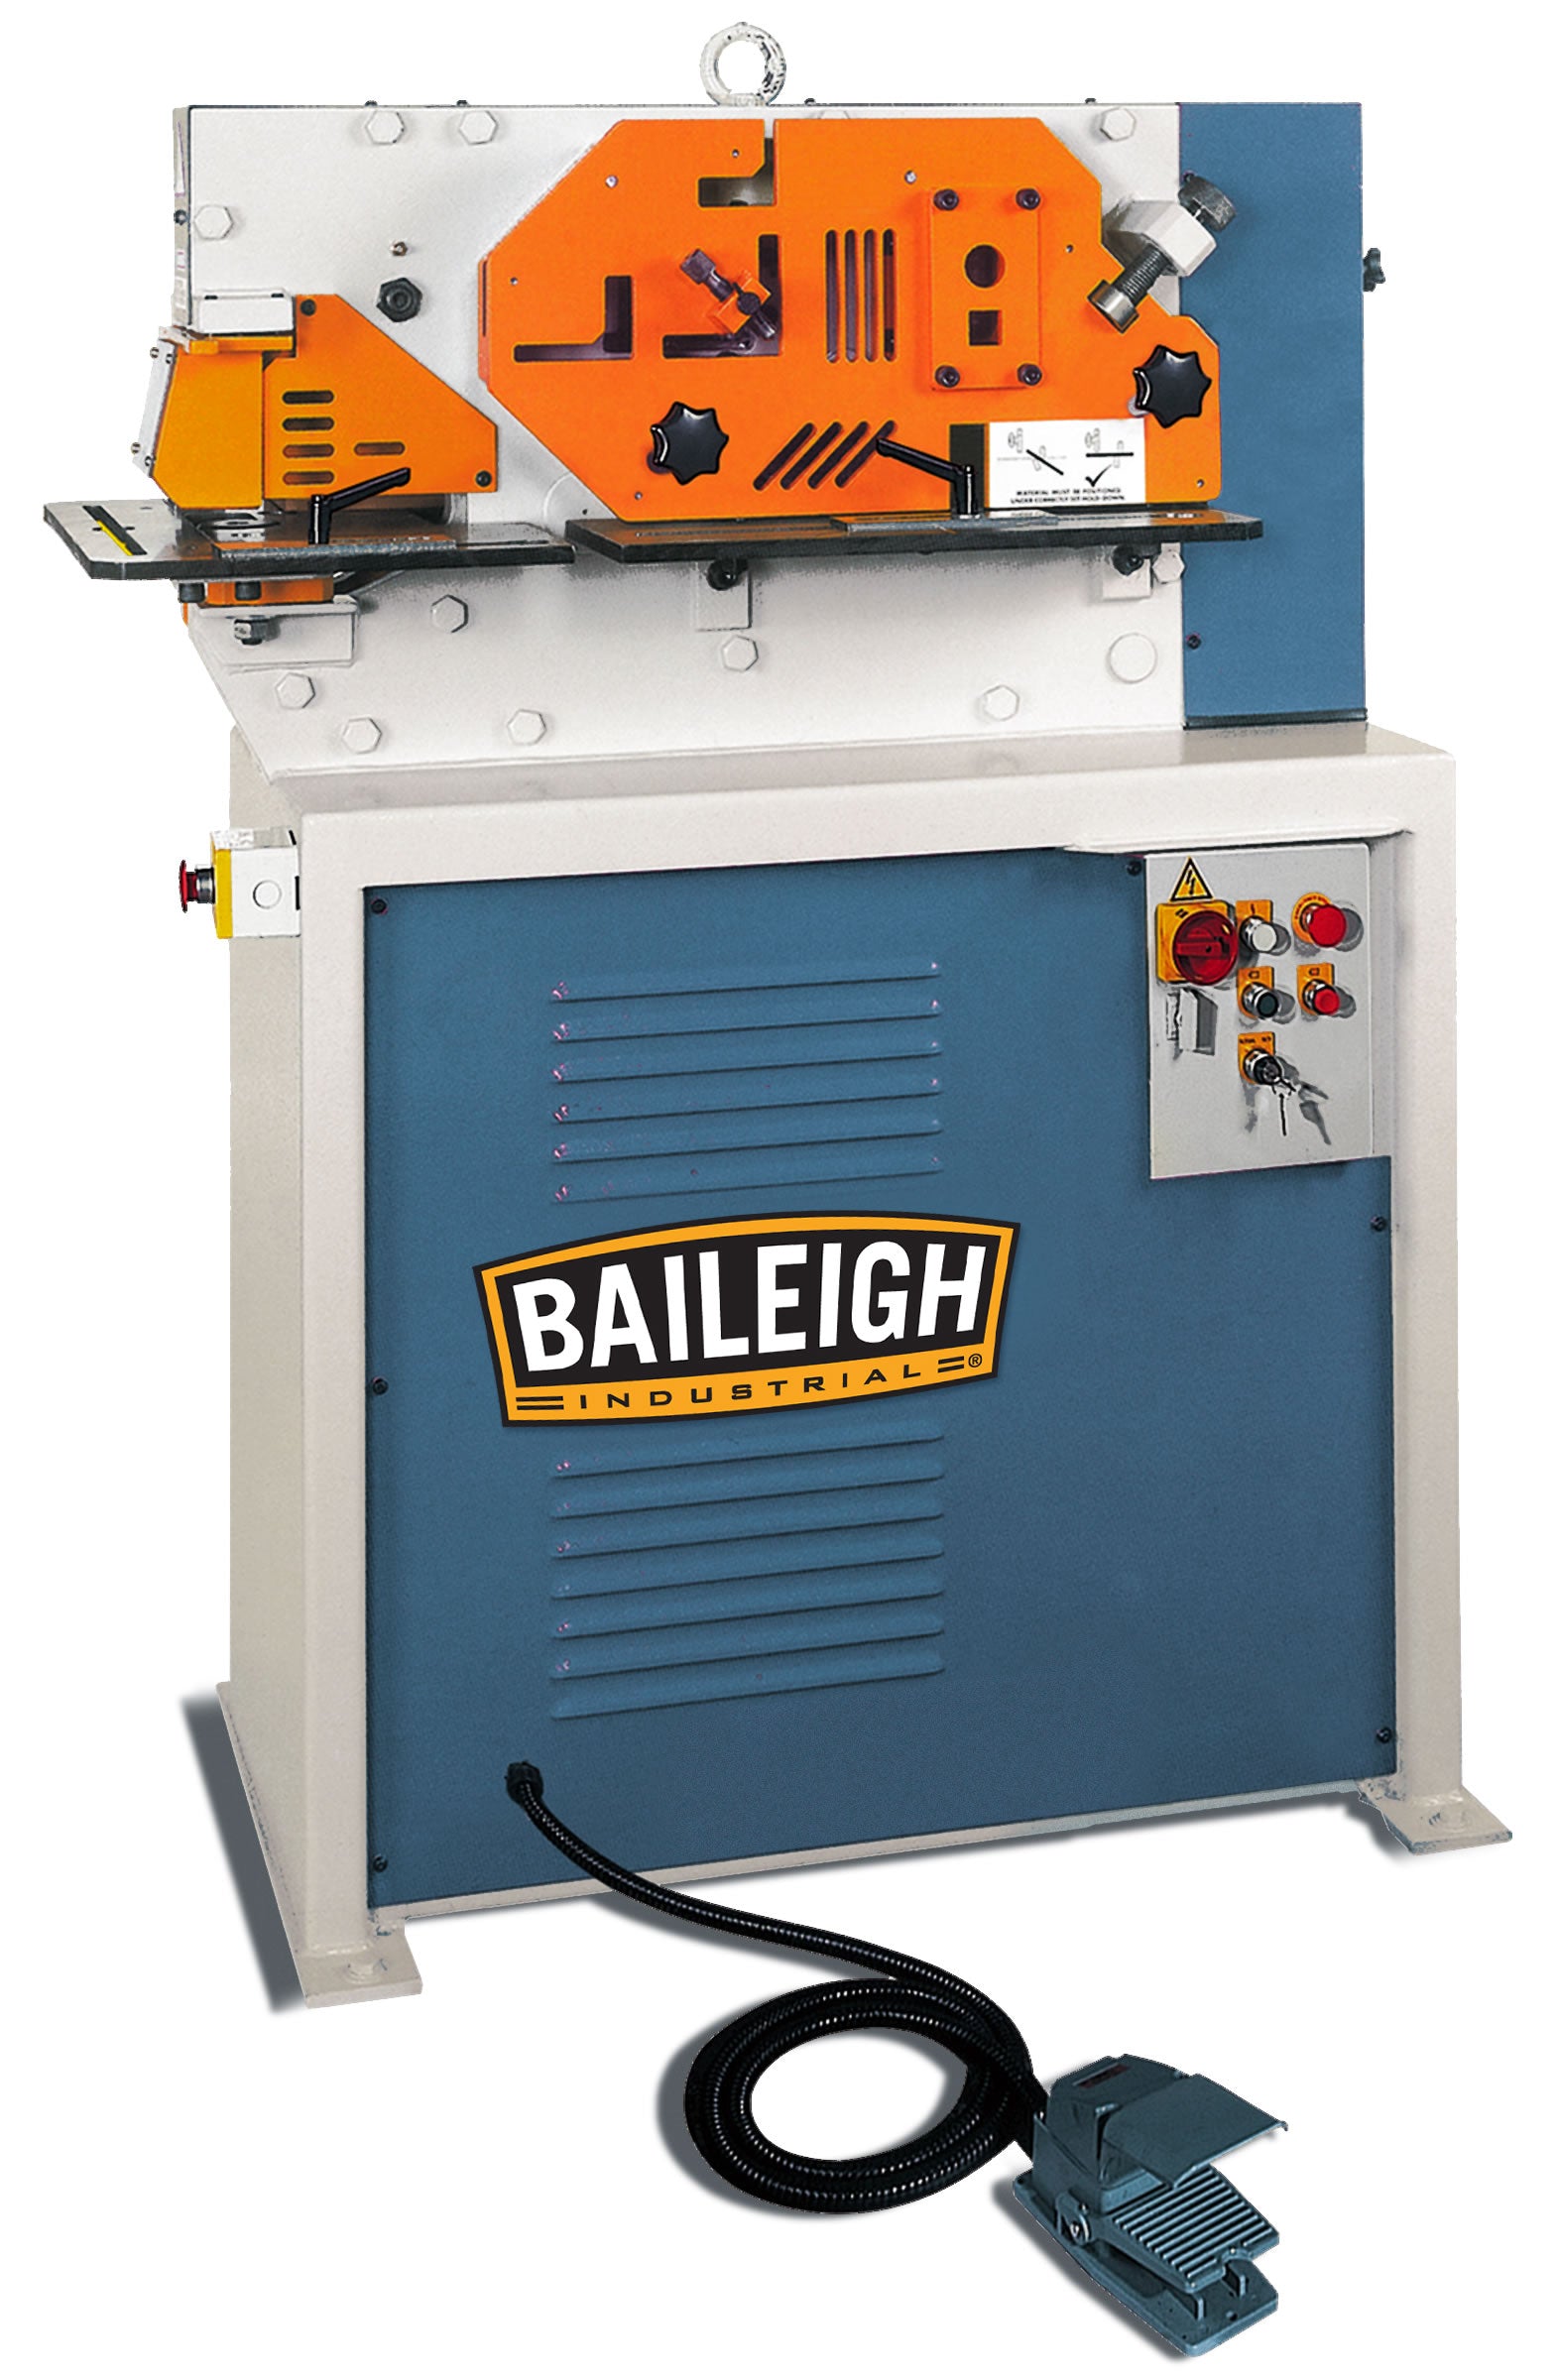 Baileigh SW-441 220V 1 Phase 44 Ton 4 Station Ironworker